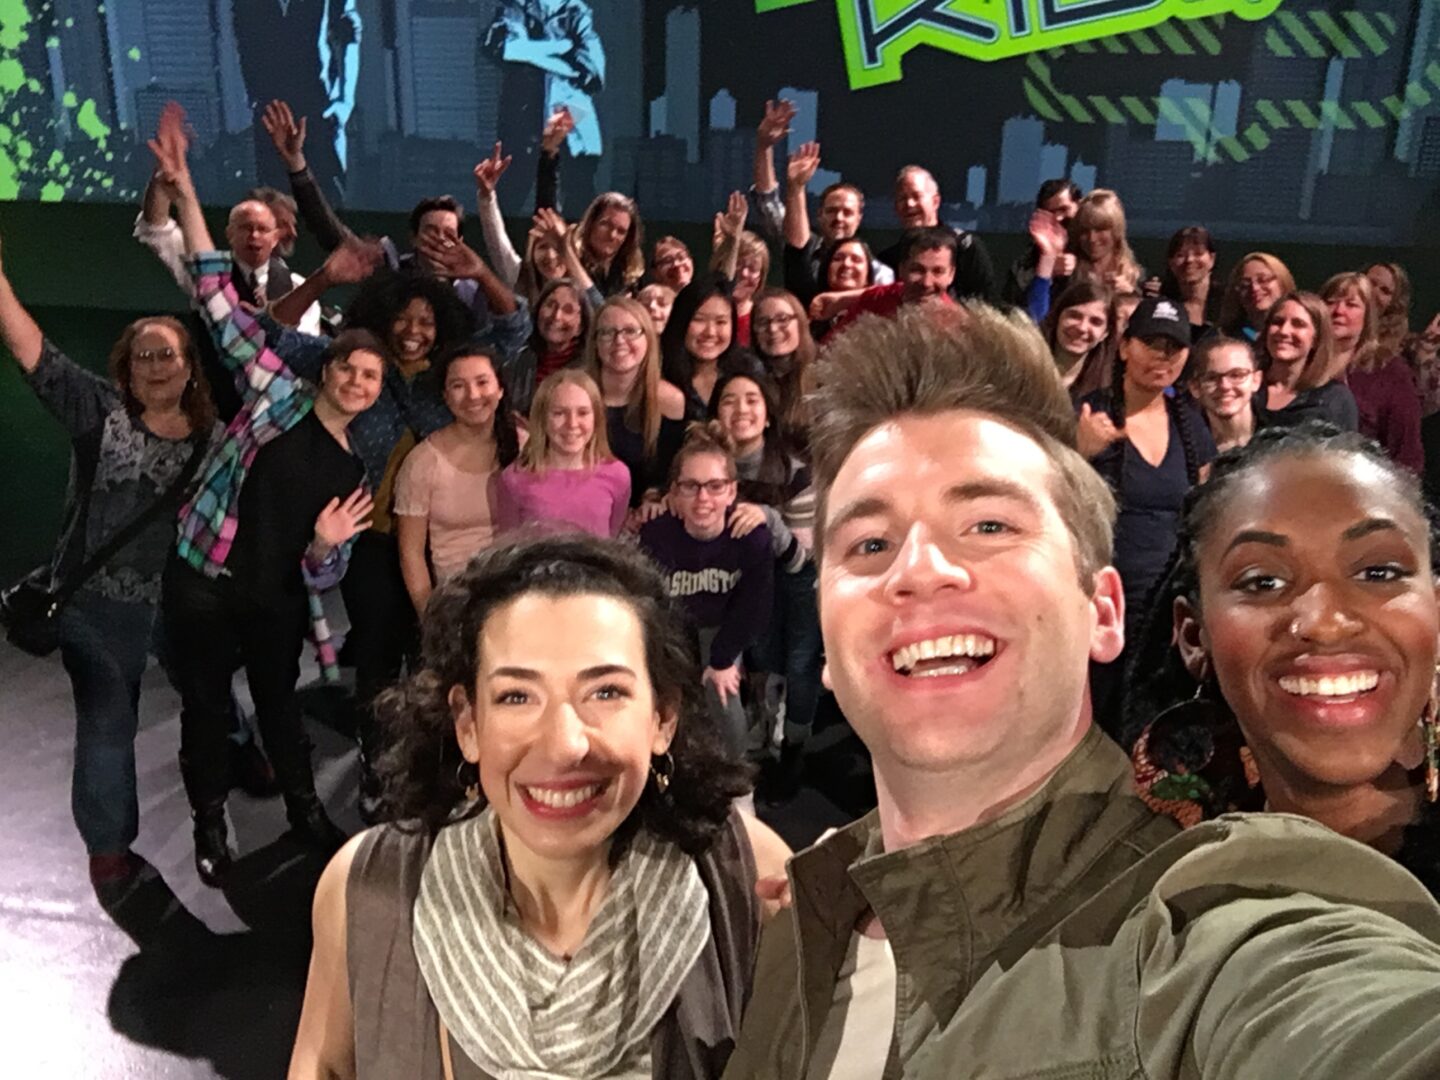 A group of people posing for a selfie in front of a green screen.